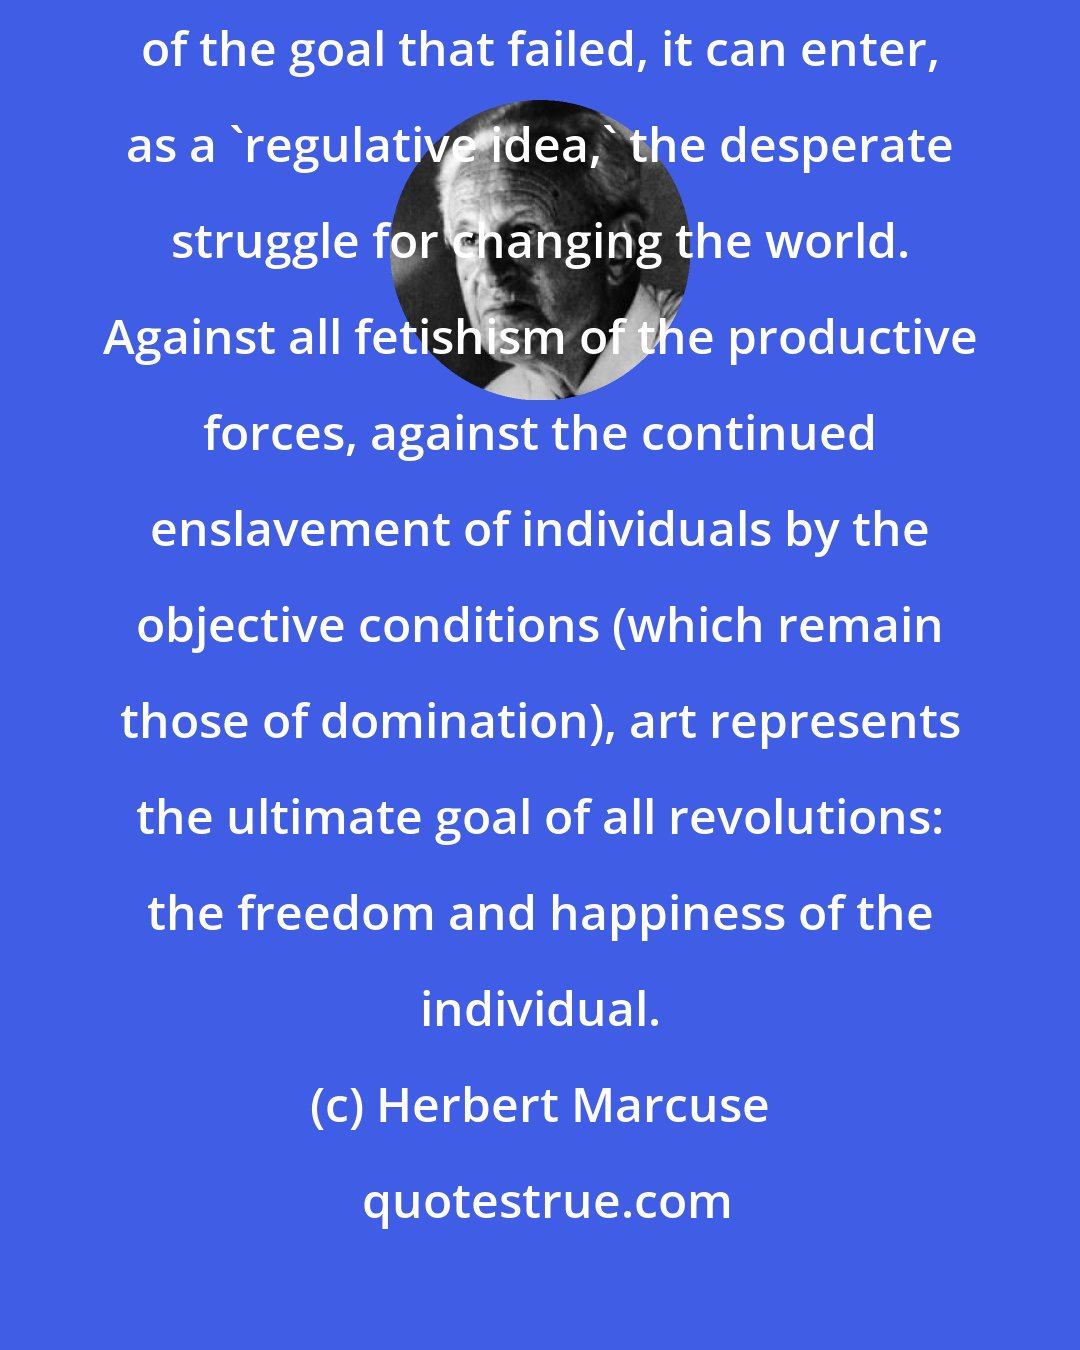 Herbert Marcuse: Inasmuch as art preserves, with the promise of happiness, the memory of the goal that failed, it can enter, as a 'regulative idea,' the desperate struggle for changing the world. Against all fetishism of the productive forces, against the continued enslavement of individuals by the objective conditions (which remain those of domination), art represents the ultimate goal of all revolutions: the freedom and happiness of the individual.